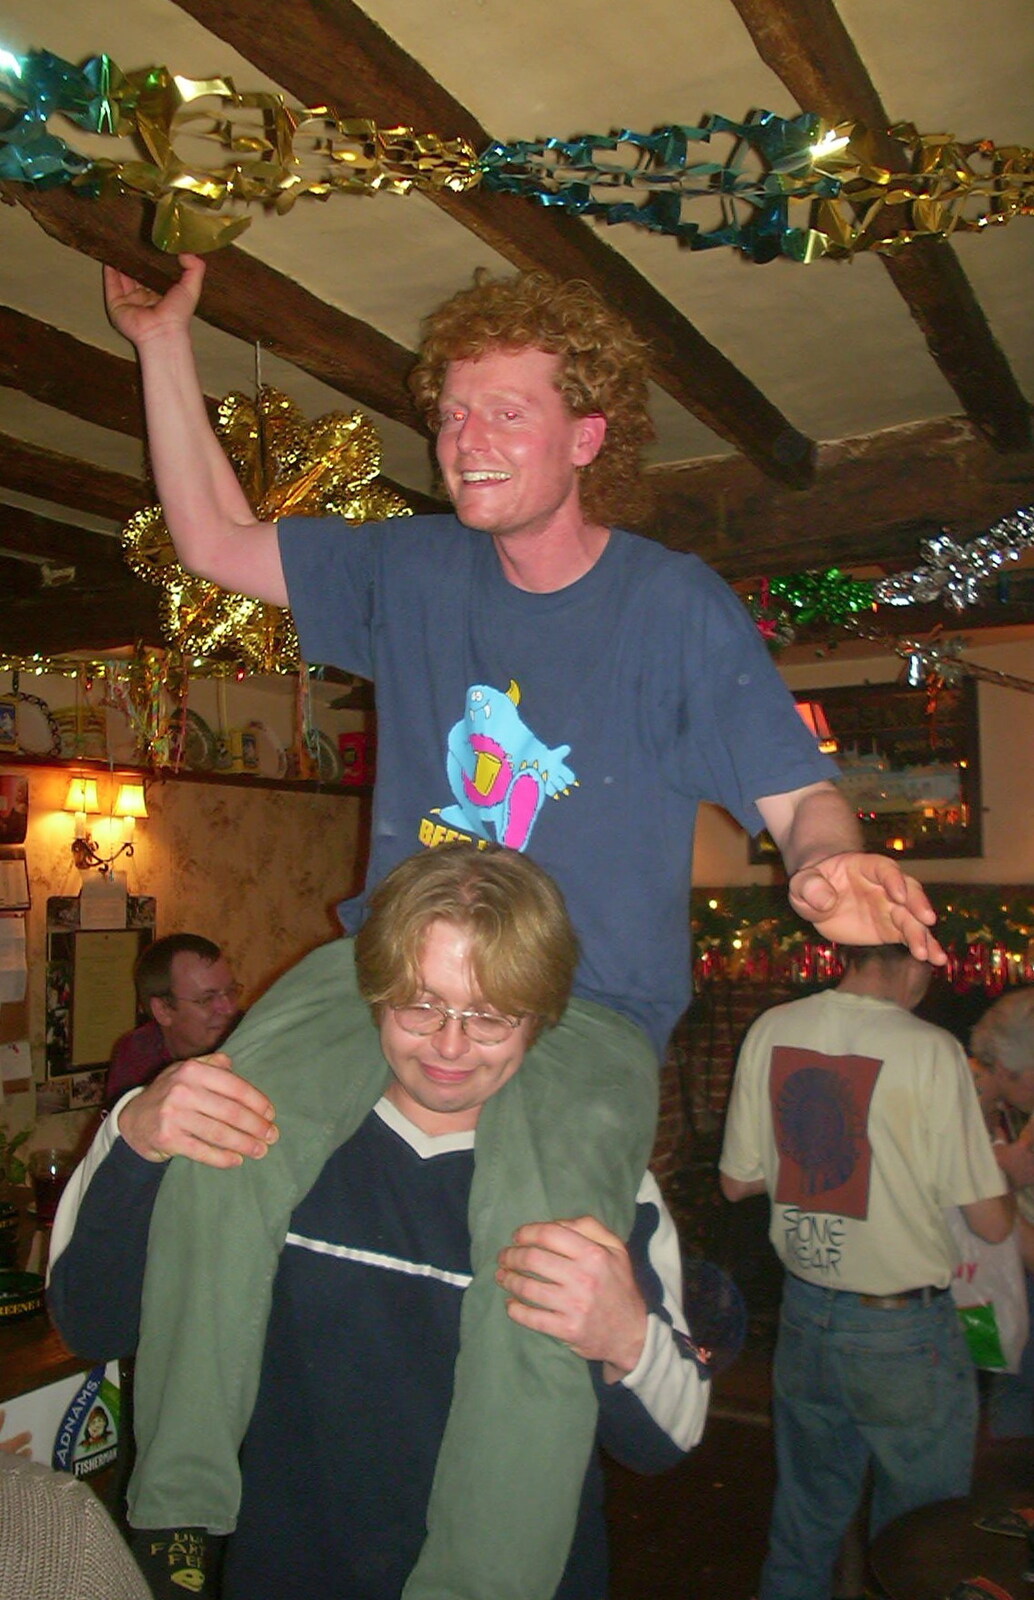 New Year's Eve at the Swan Inn, Brome, Suffolk - 31st December 2002: Marc gives Wavy a piggy-back